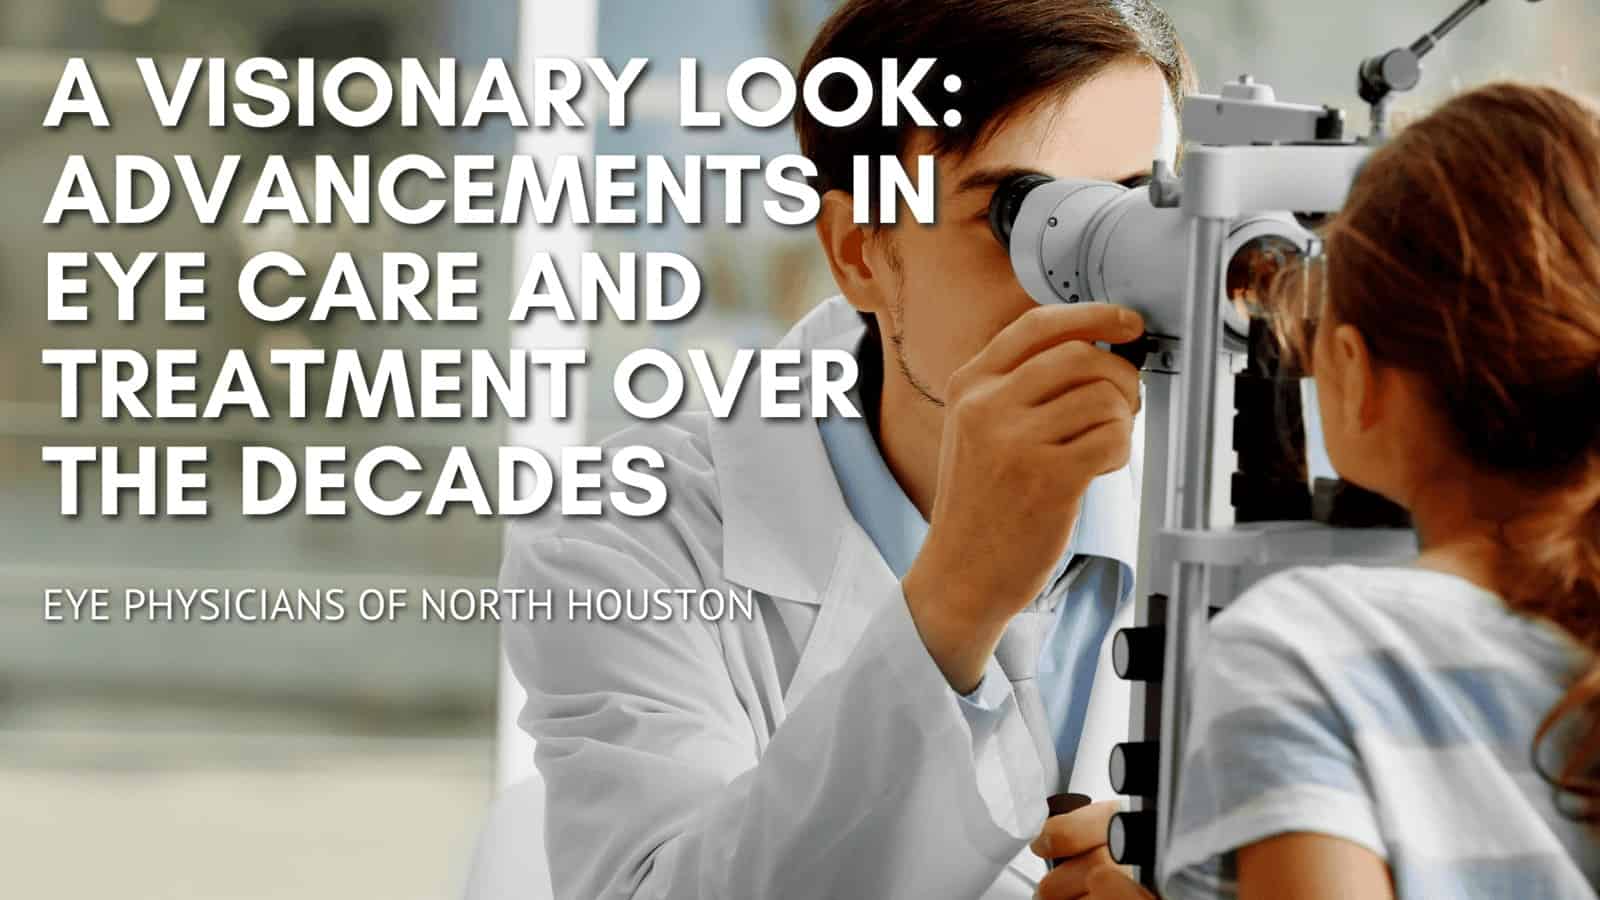 A Visionary Look: Advancements in Eye Care and Treatment Over the Decades